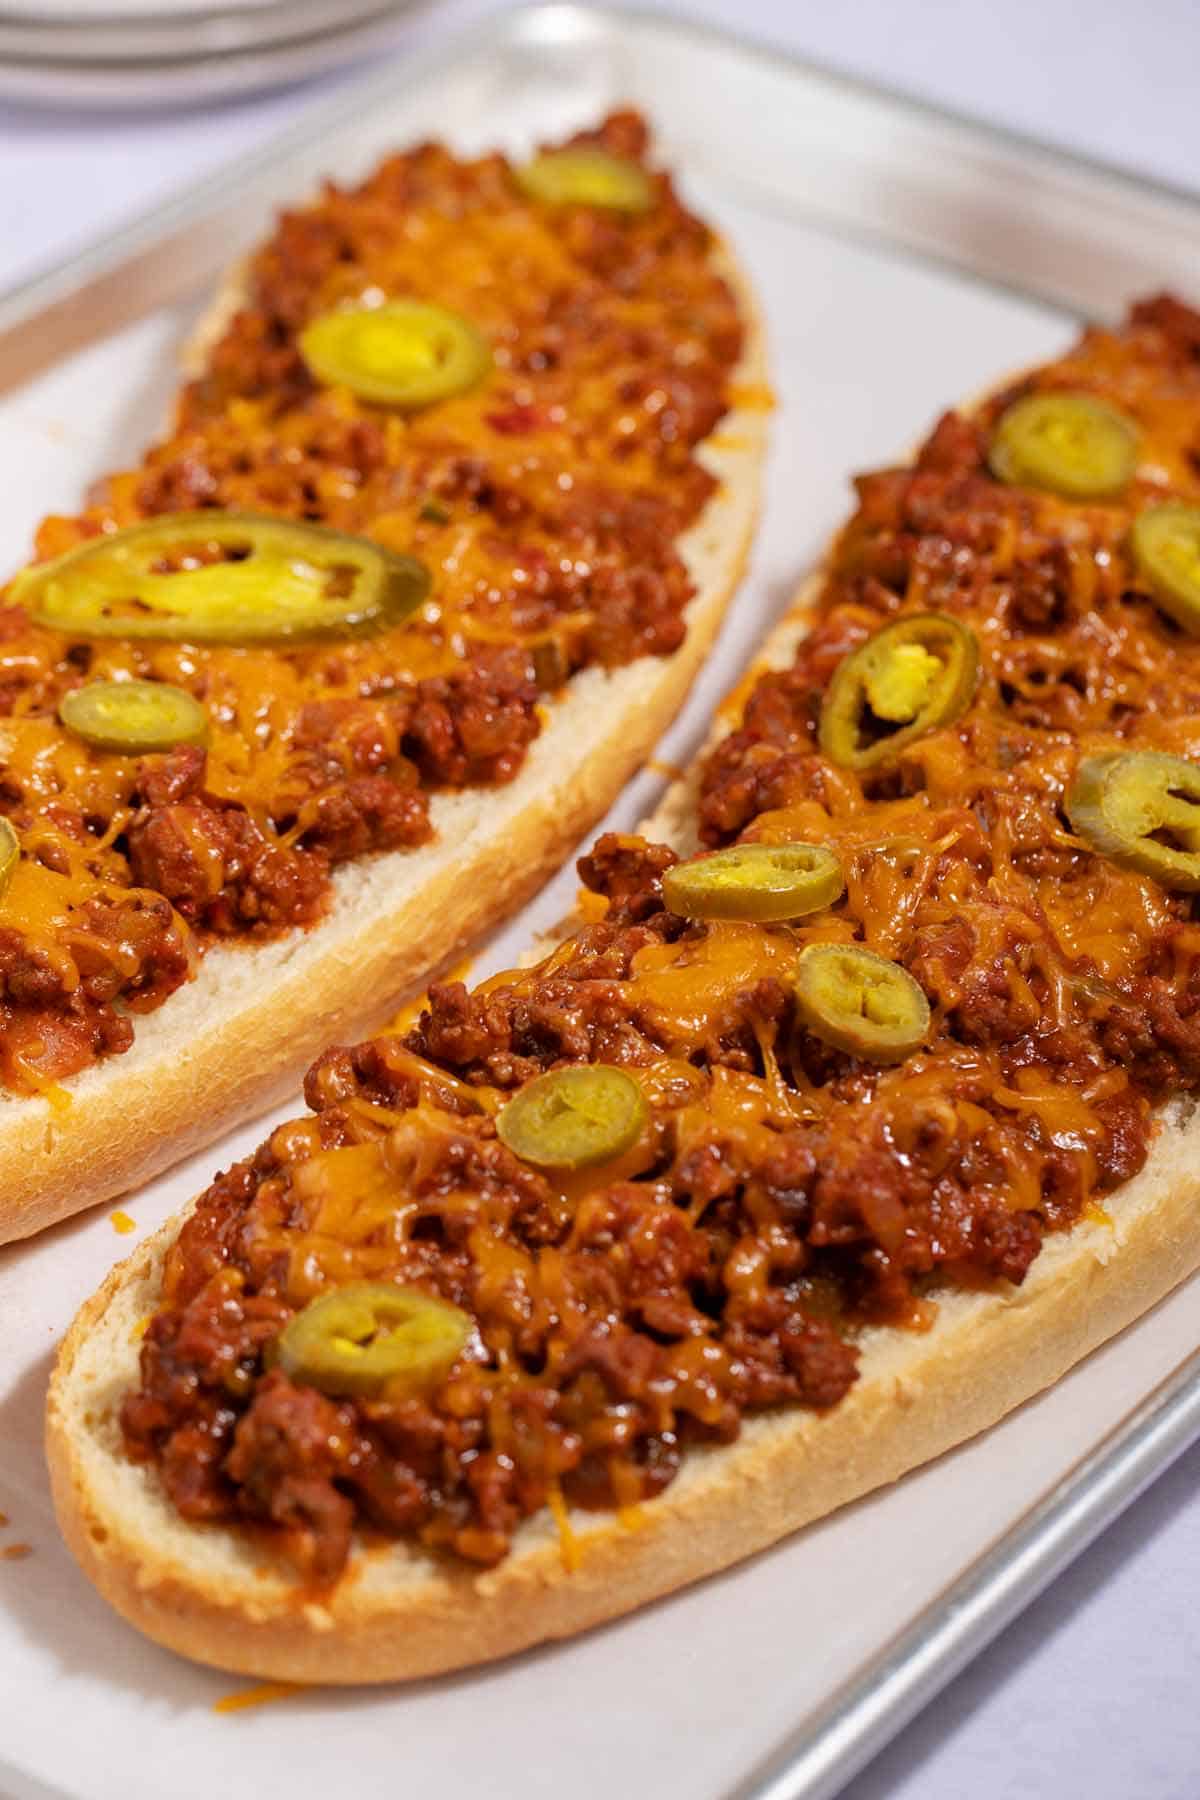 Baked sloppy joes with cheese on a French loaf.